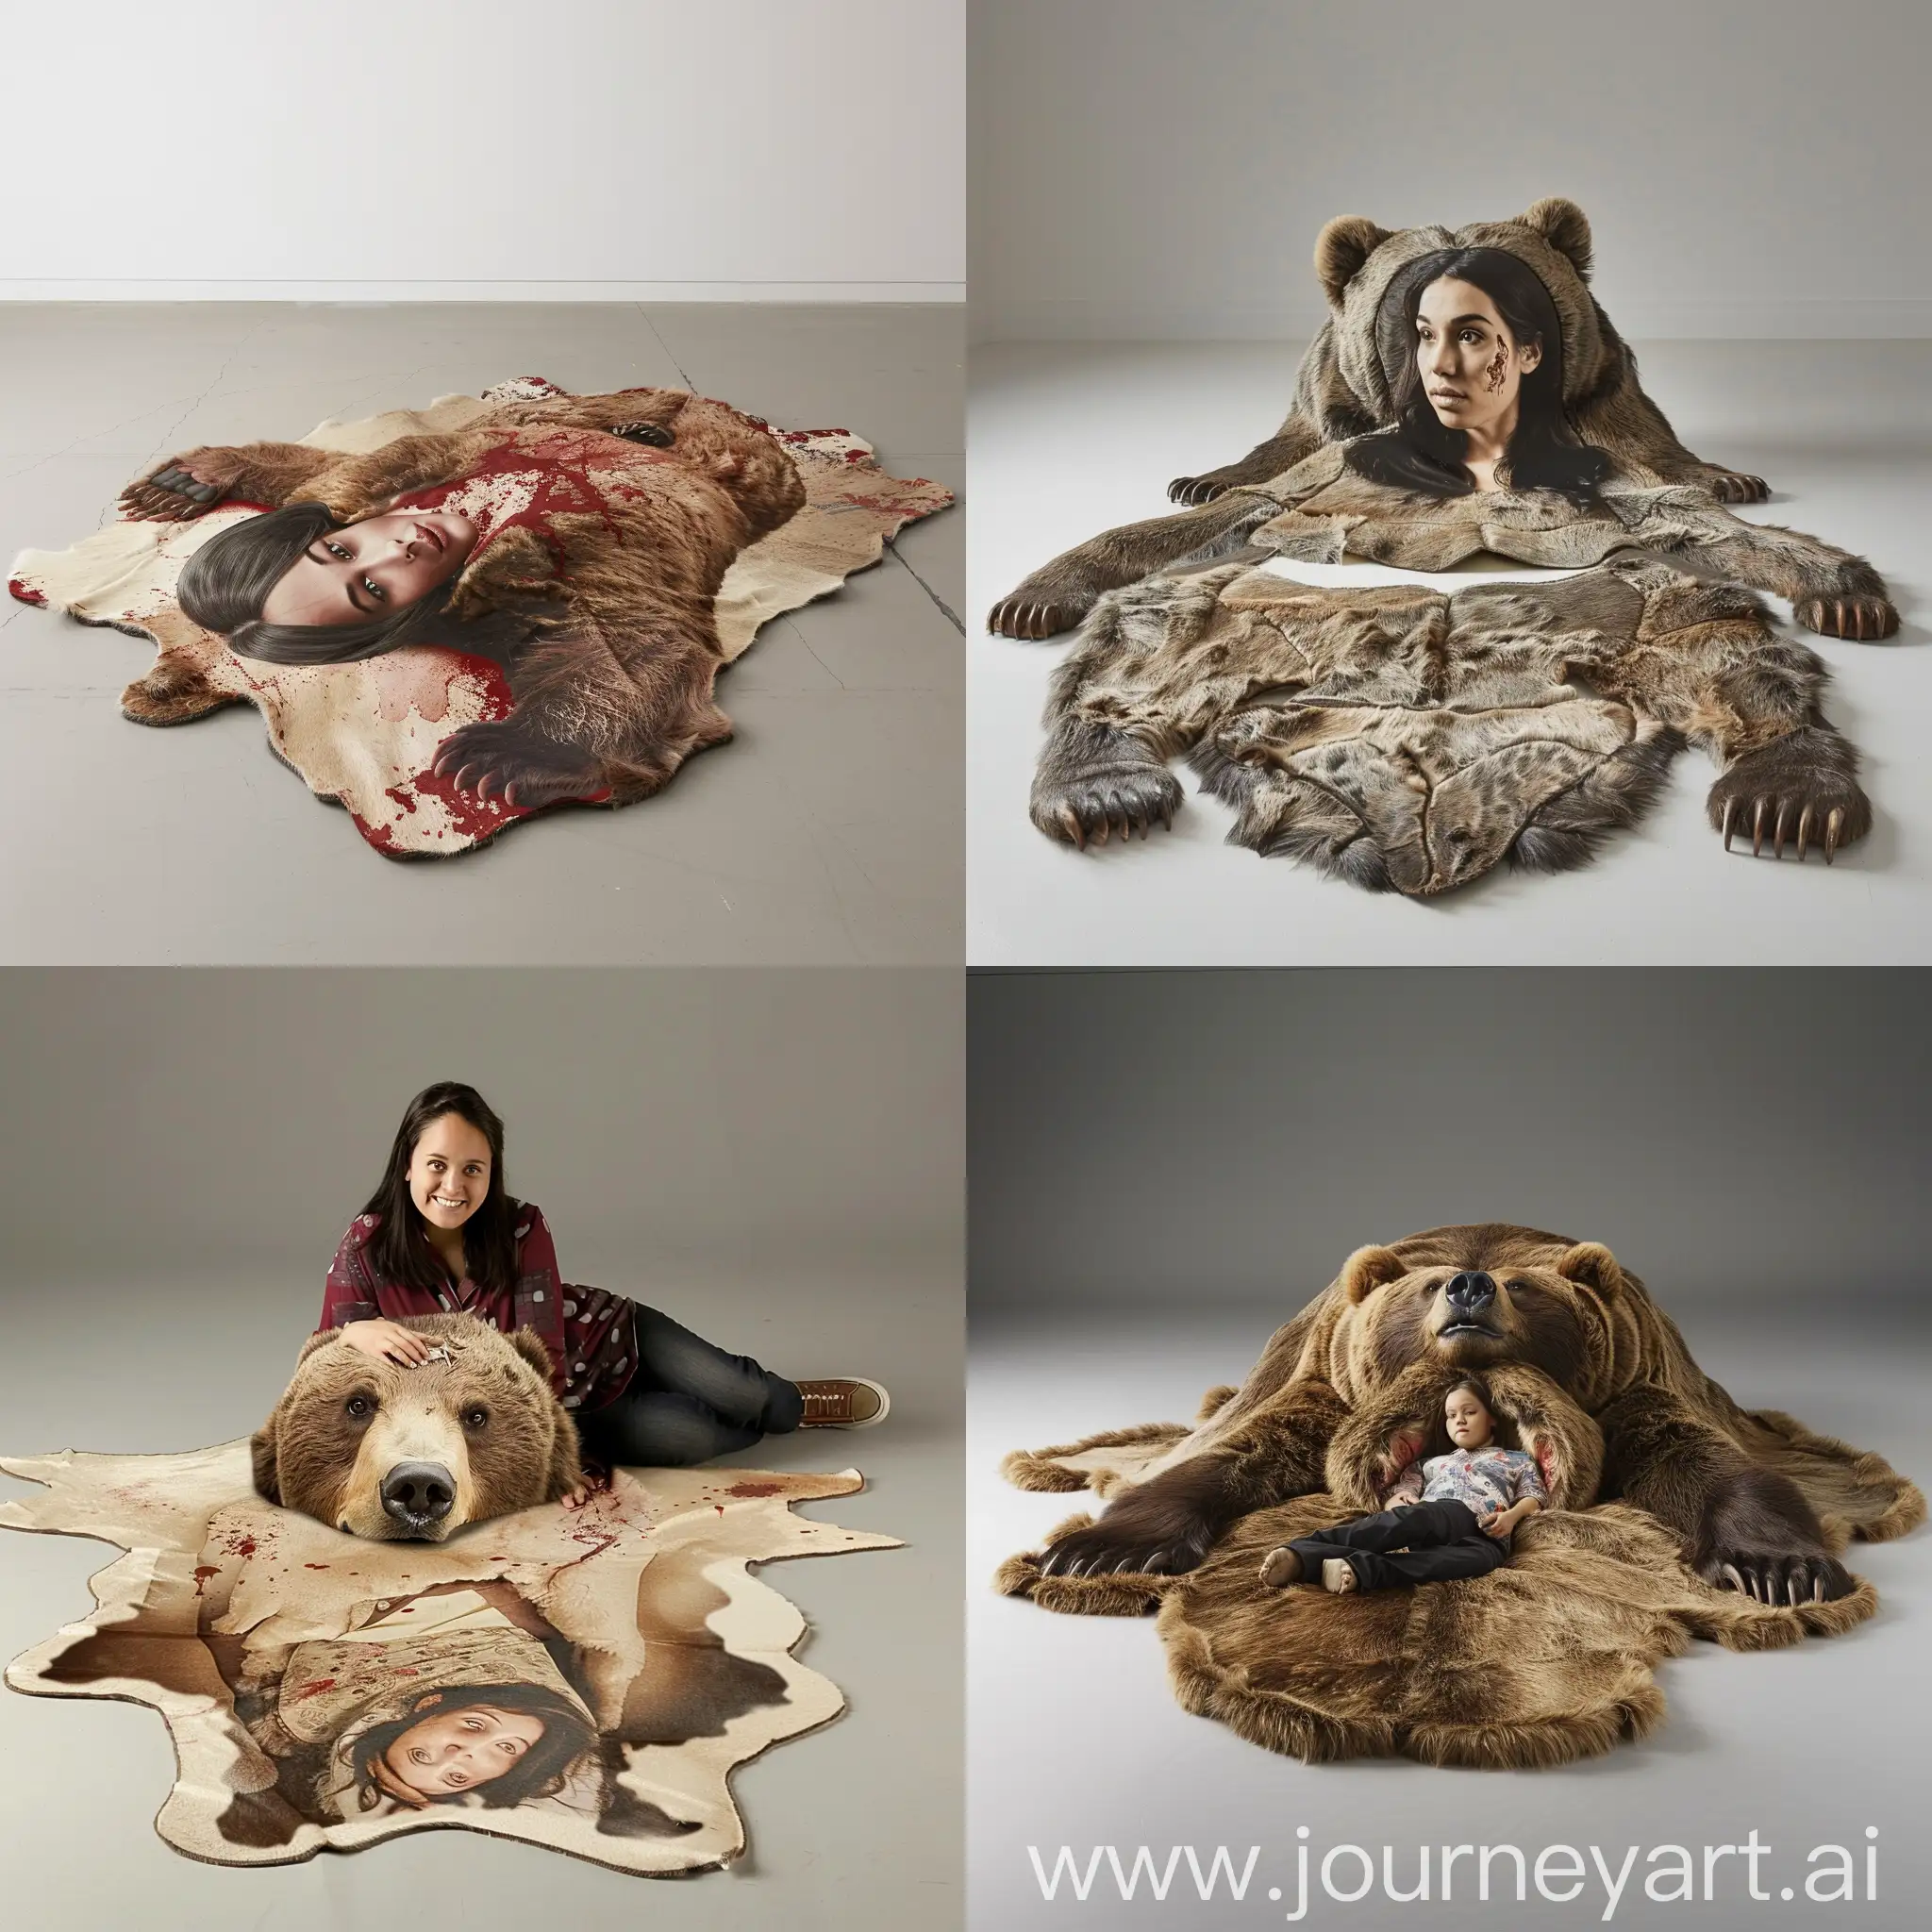 one of those bear skin rugs with the head and pelt spread out  but instead of an animal its a human woman but not bloody just surreal